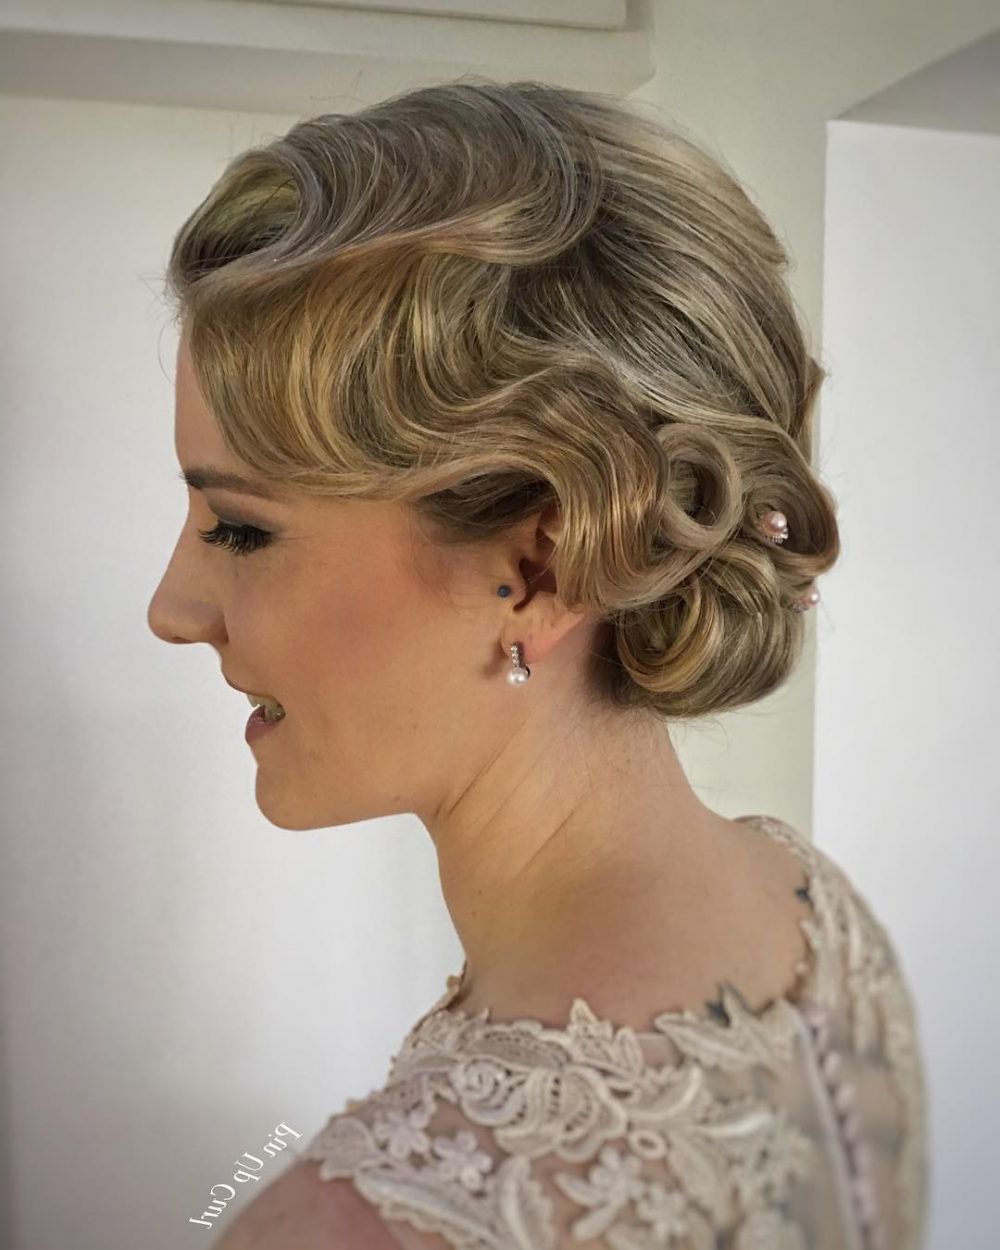 Vintage Glam: 15 Roaring 20s Hairstyles Within Trendy 20s Medium Hairstyles (View 1 of 20)